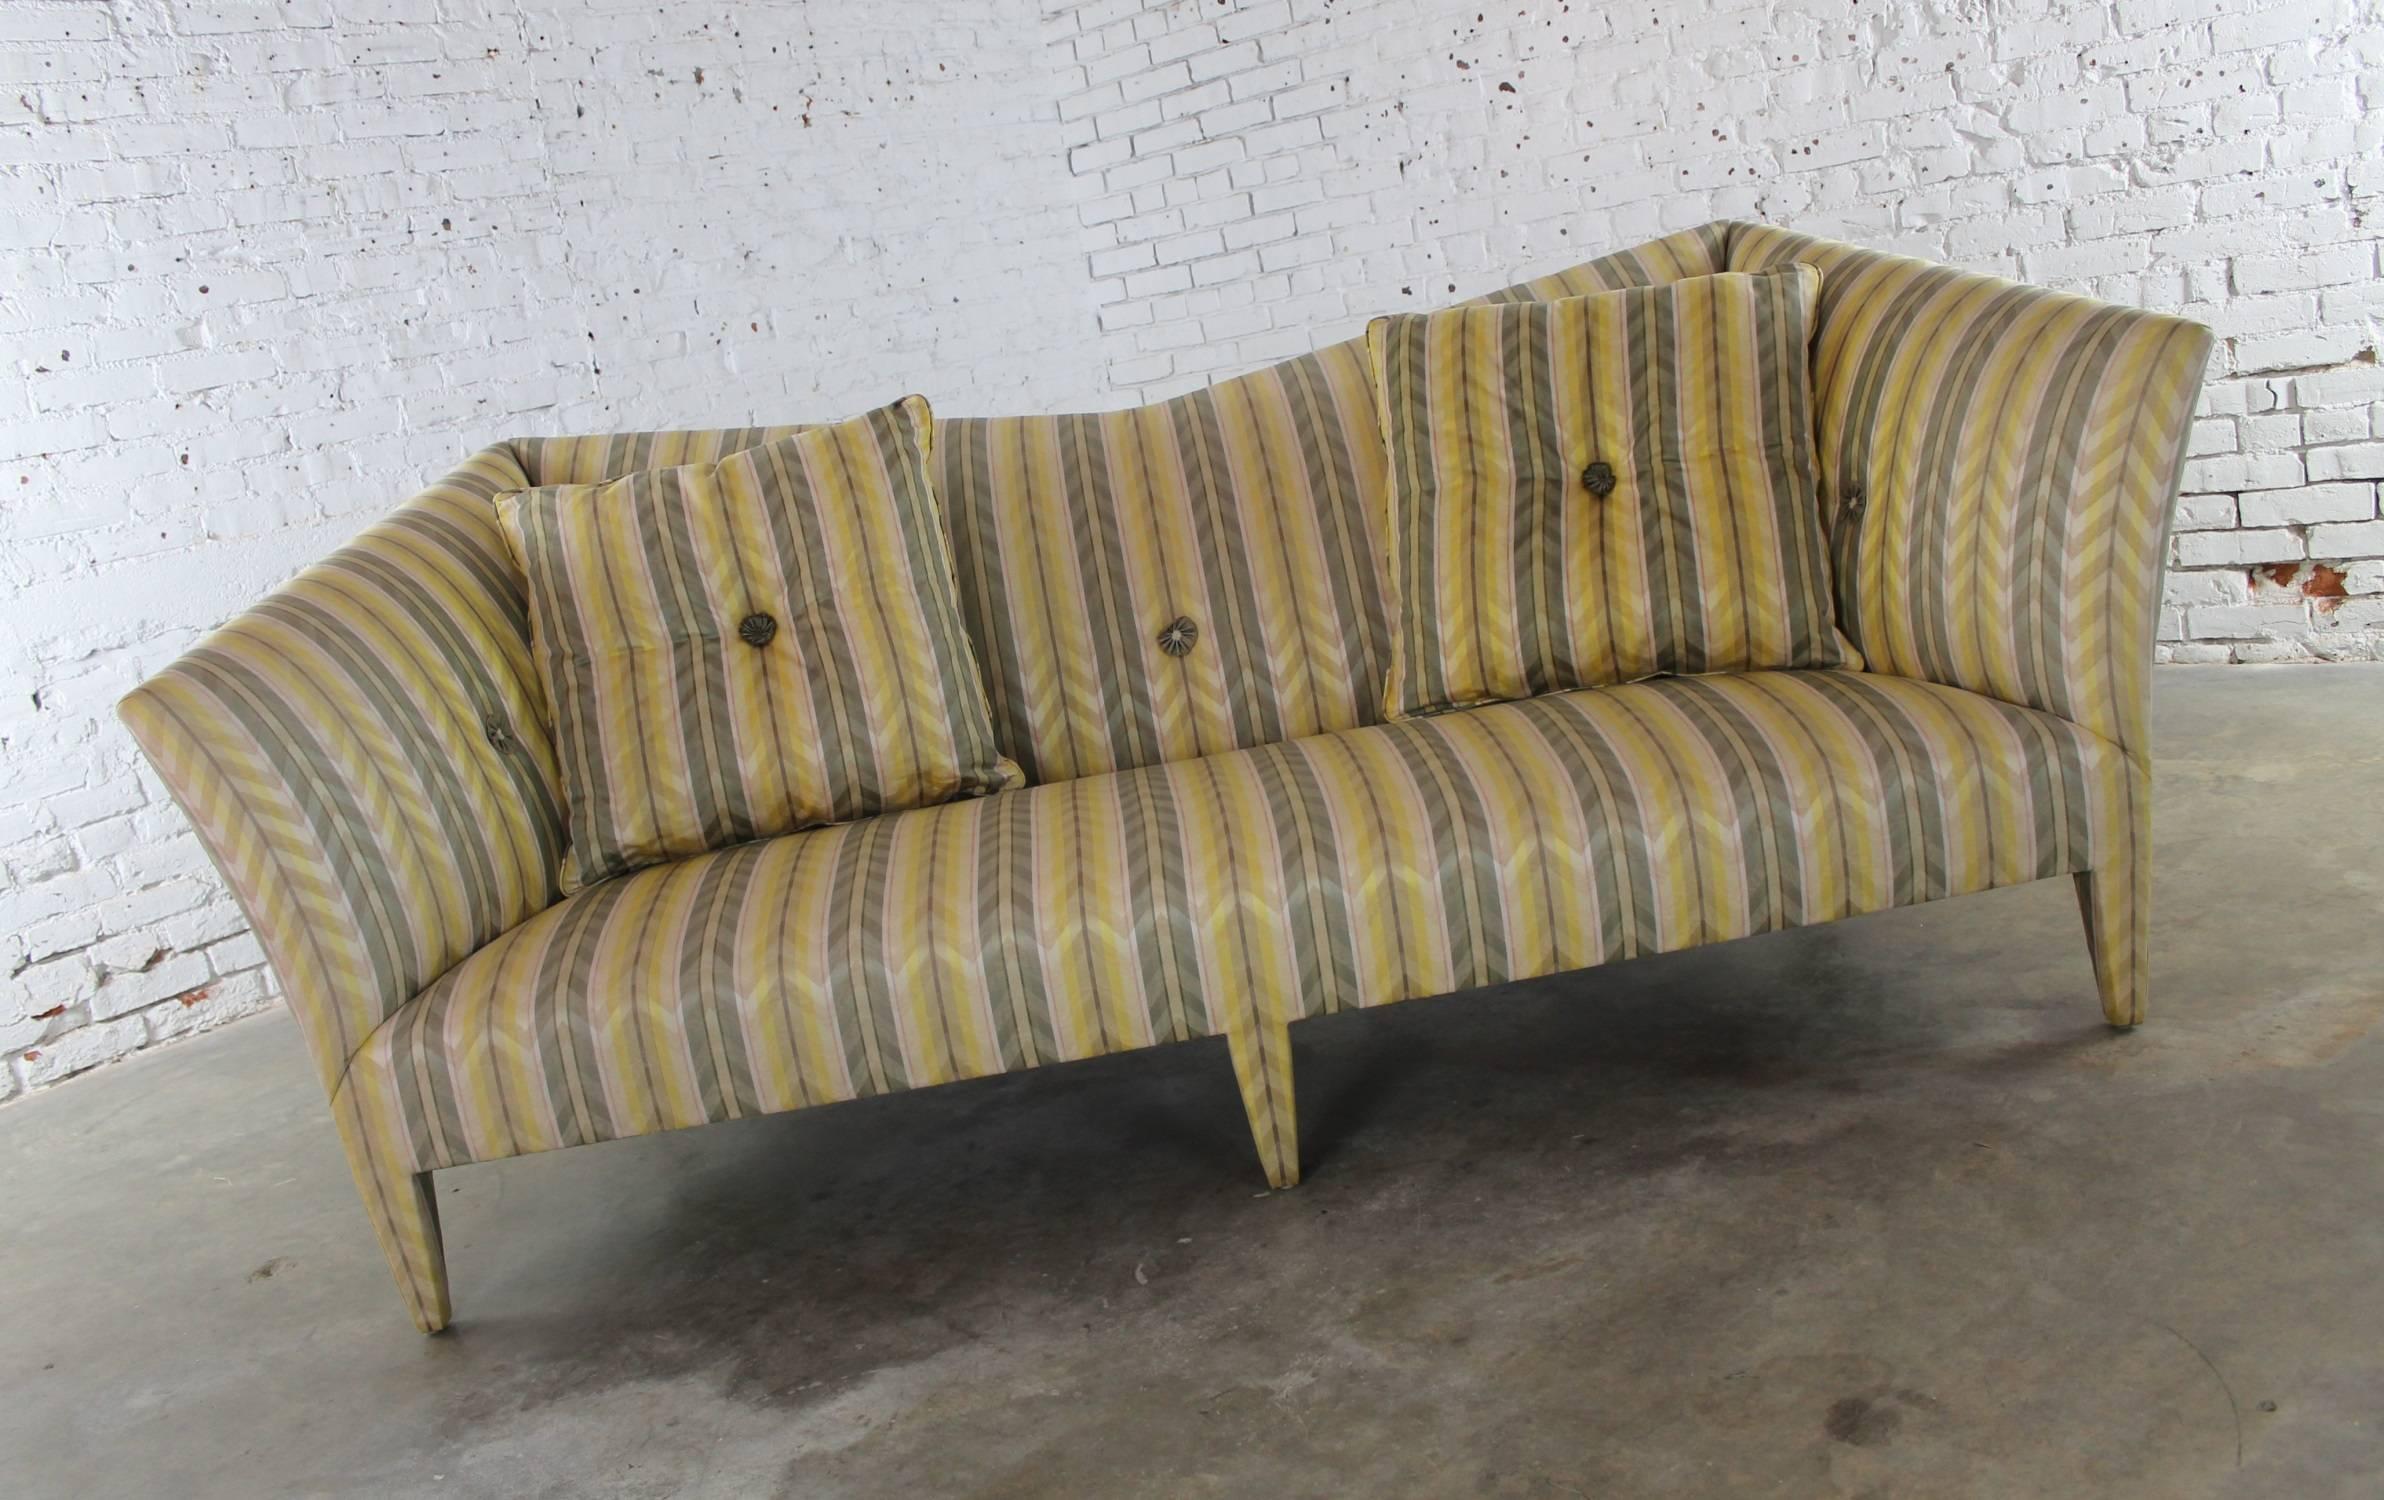 Incredible spirit sofa by John Hutton for Donghia. This one is in its original yellow striped fabric and fabulous condition, circa 1990s. The dust cover has been replaced.

This sofa is simply wonderful! It was designed by John Hutton for the